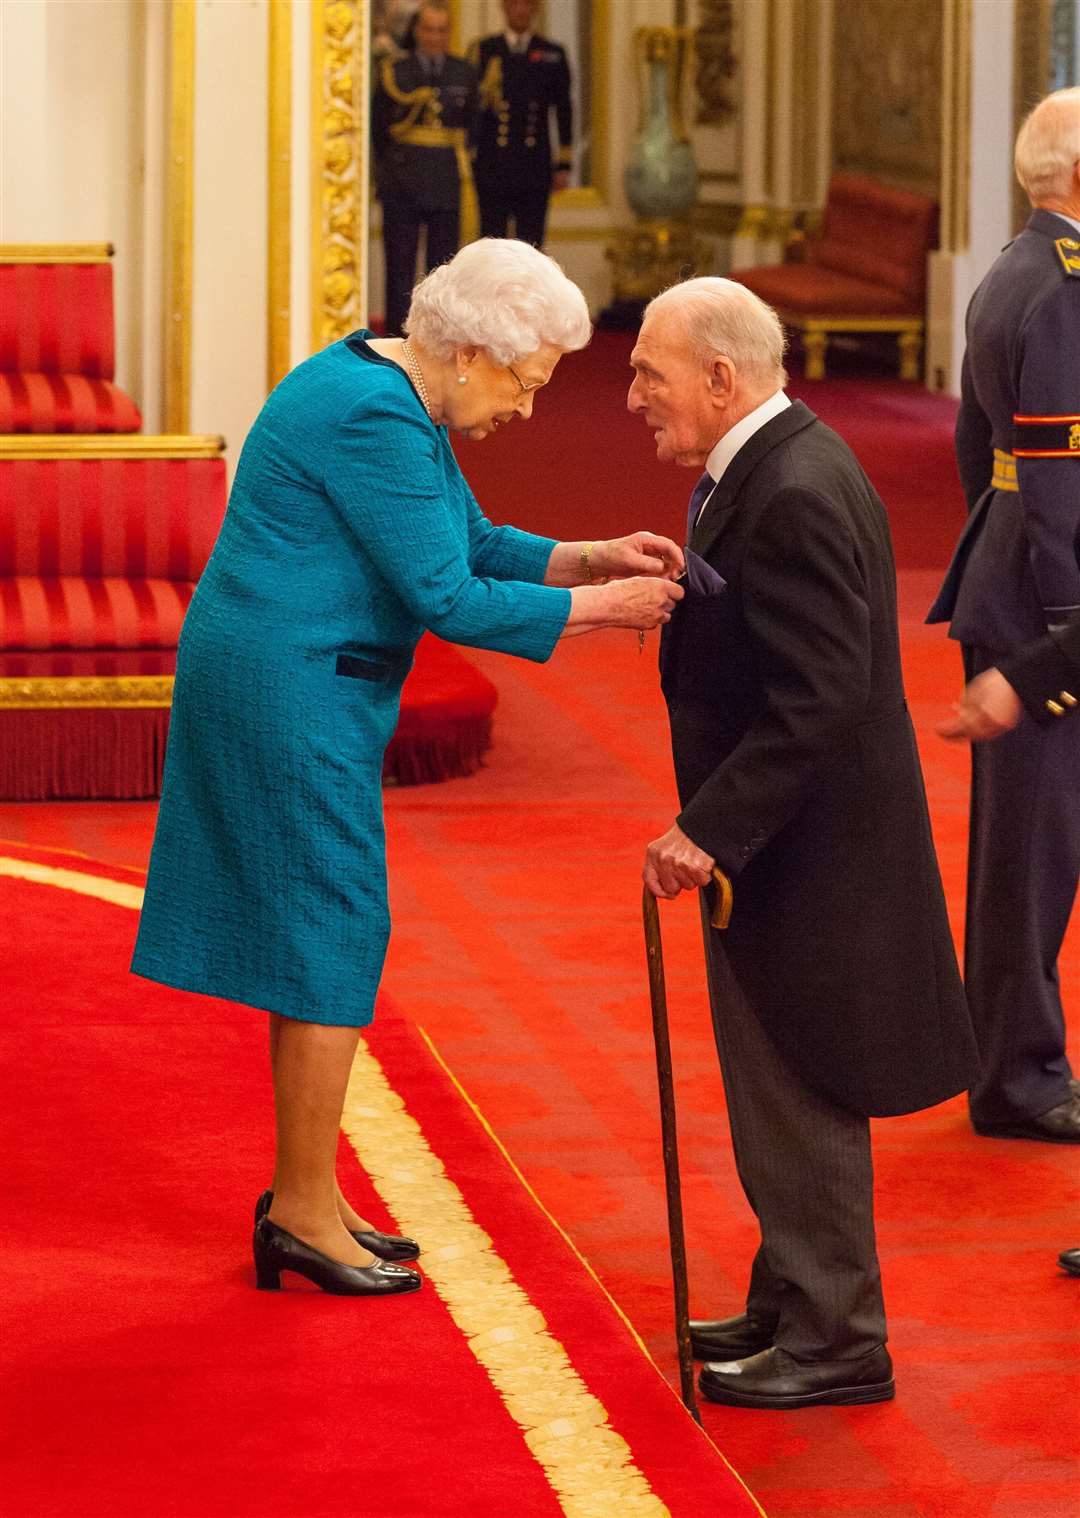 Squadron Leader George Leonard ‘Johnny’ Johnson was made an MBE by the Queen (Dominic Lipinski/PA)